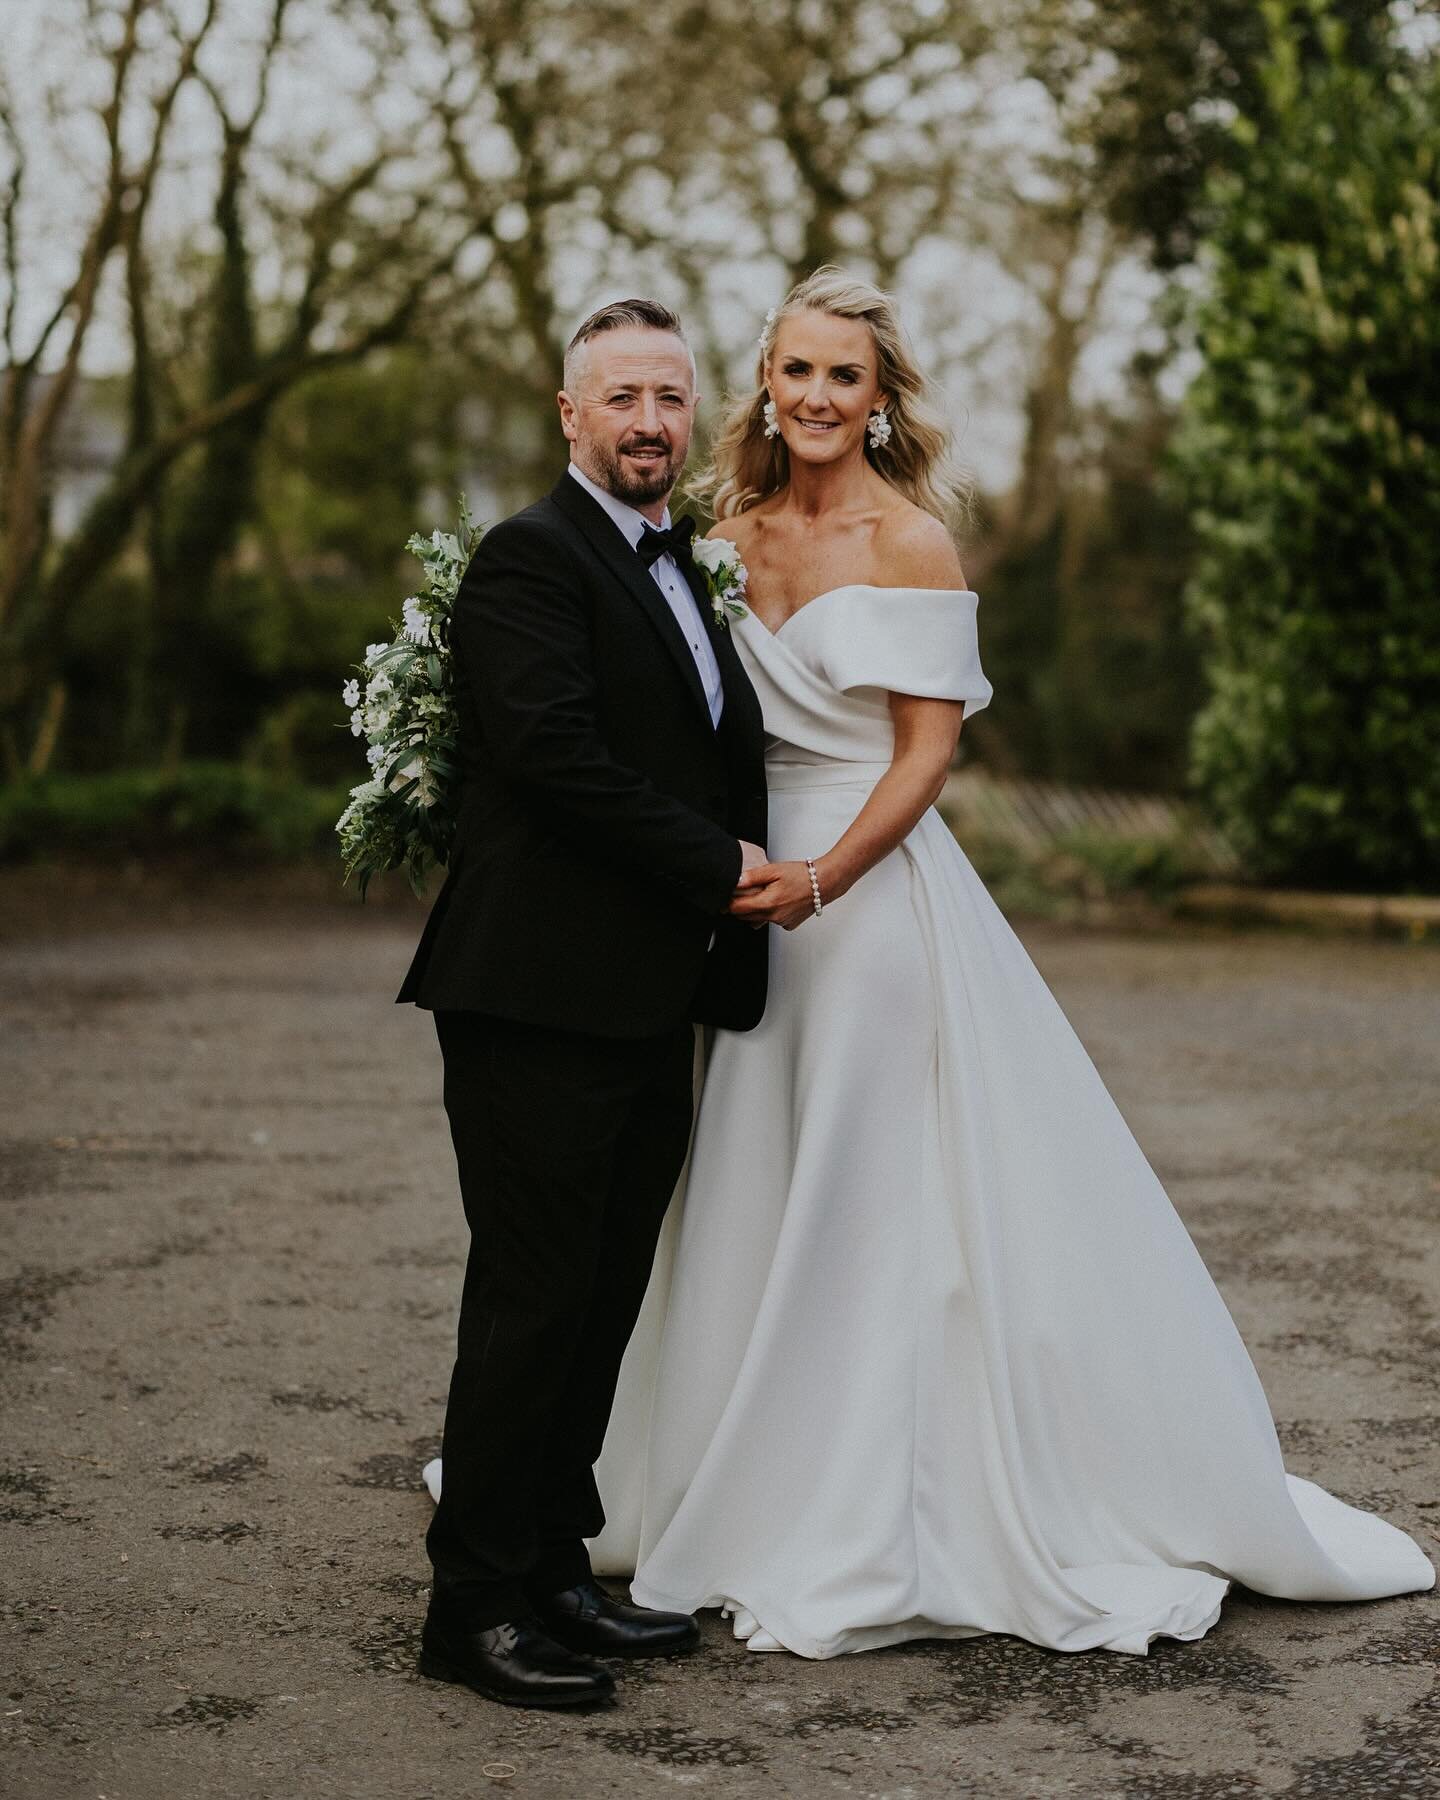 Wedding 3 of 3 to finish off the weeks weddings and each and every one of them was a banger! Yesterday we had the pleasure of sharing Ciara &amp; Johnny&rsquo;s special day @lamonhotelbelfast. I honestly love my job getting to meet amazing people wee